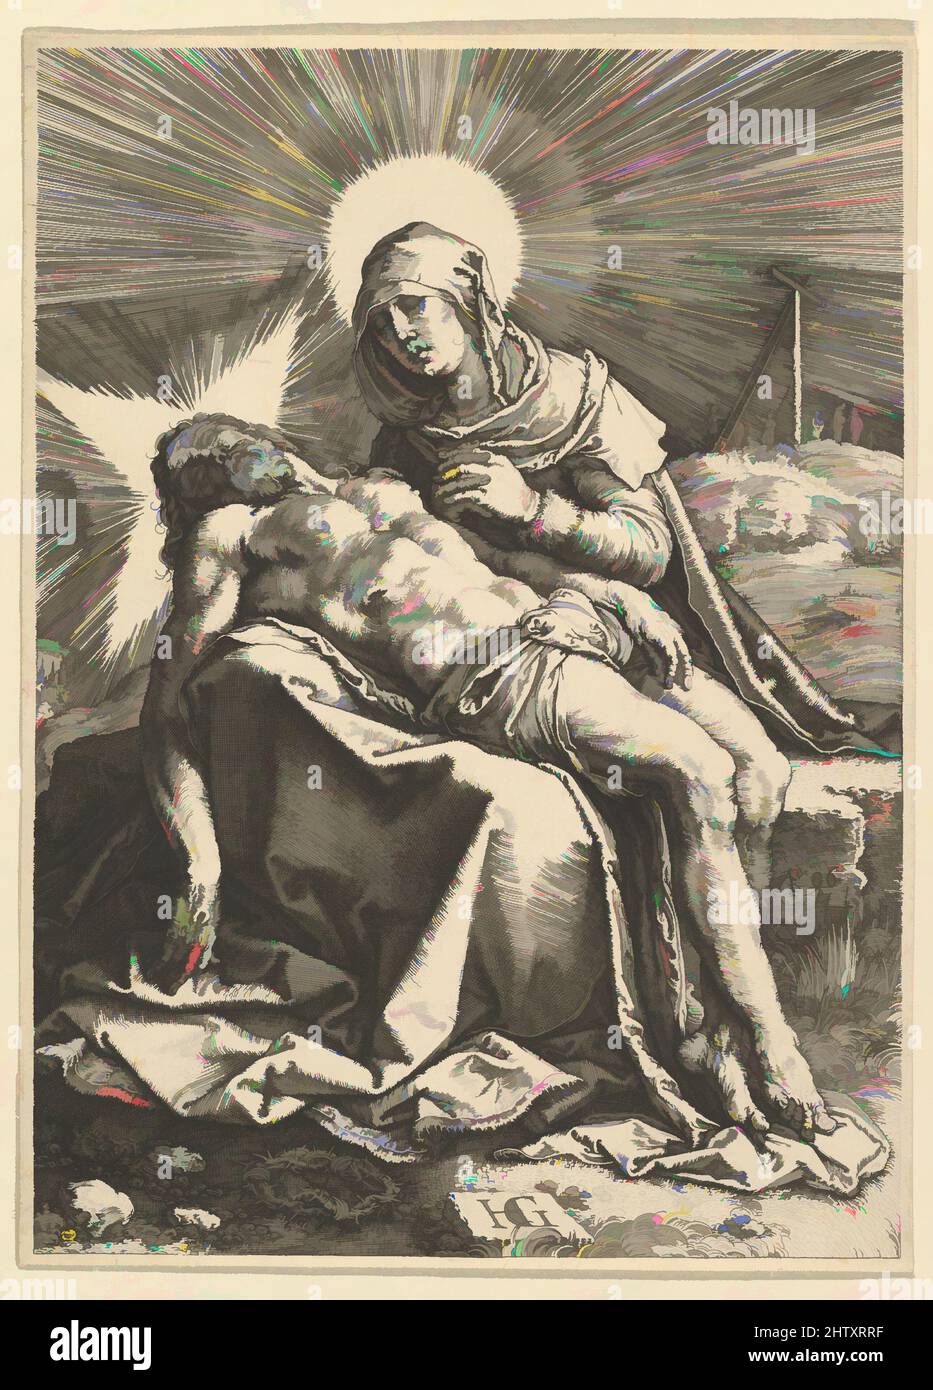 Art inspired by Pietà, 1596, Engraving; second state of two, sheet: 7 1/8 x 5 3/16 in. (18.1 x 13.1 cm), Prints, Hendrick Goltzius (Netherlandish, Mühlbracht 1558–1617 Haarlem, Classic works modernized by Artotop with a splash of modernity. Shapes, color and value, eye-catching visual impact on art. Emotions through freedom of artworks in a contemporary way. A timeless message pursuing a wildly creative new direction. Artists turning to the digital medium and creating the Artotop NFT Stock Photo